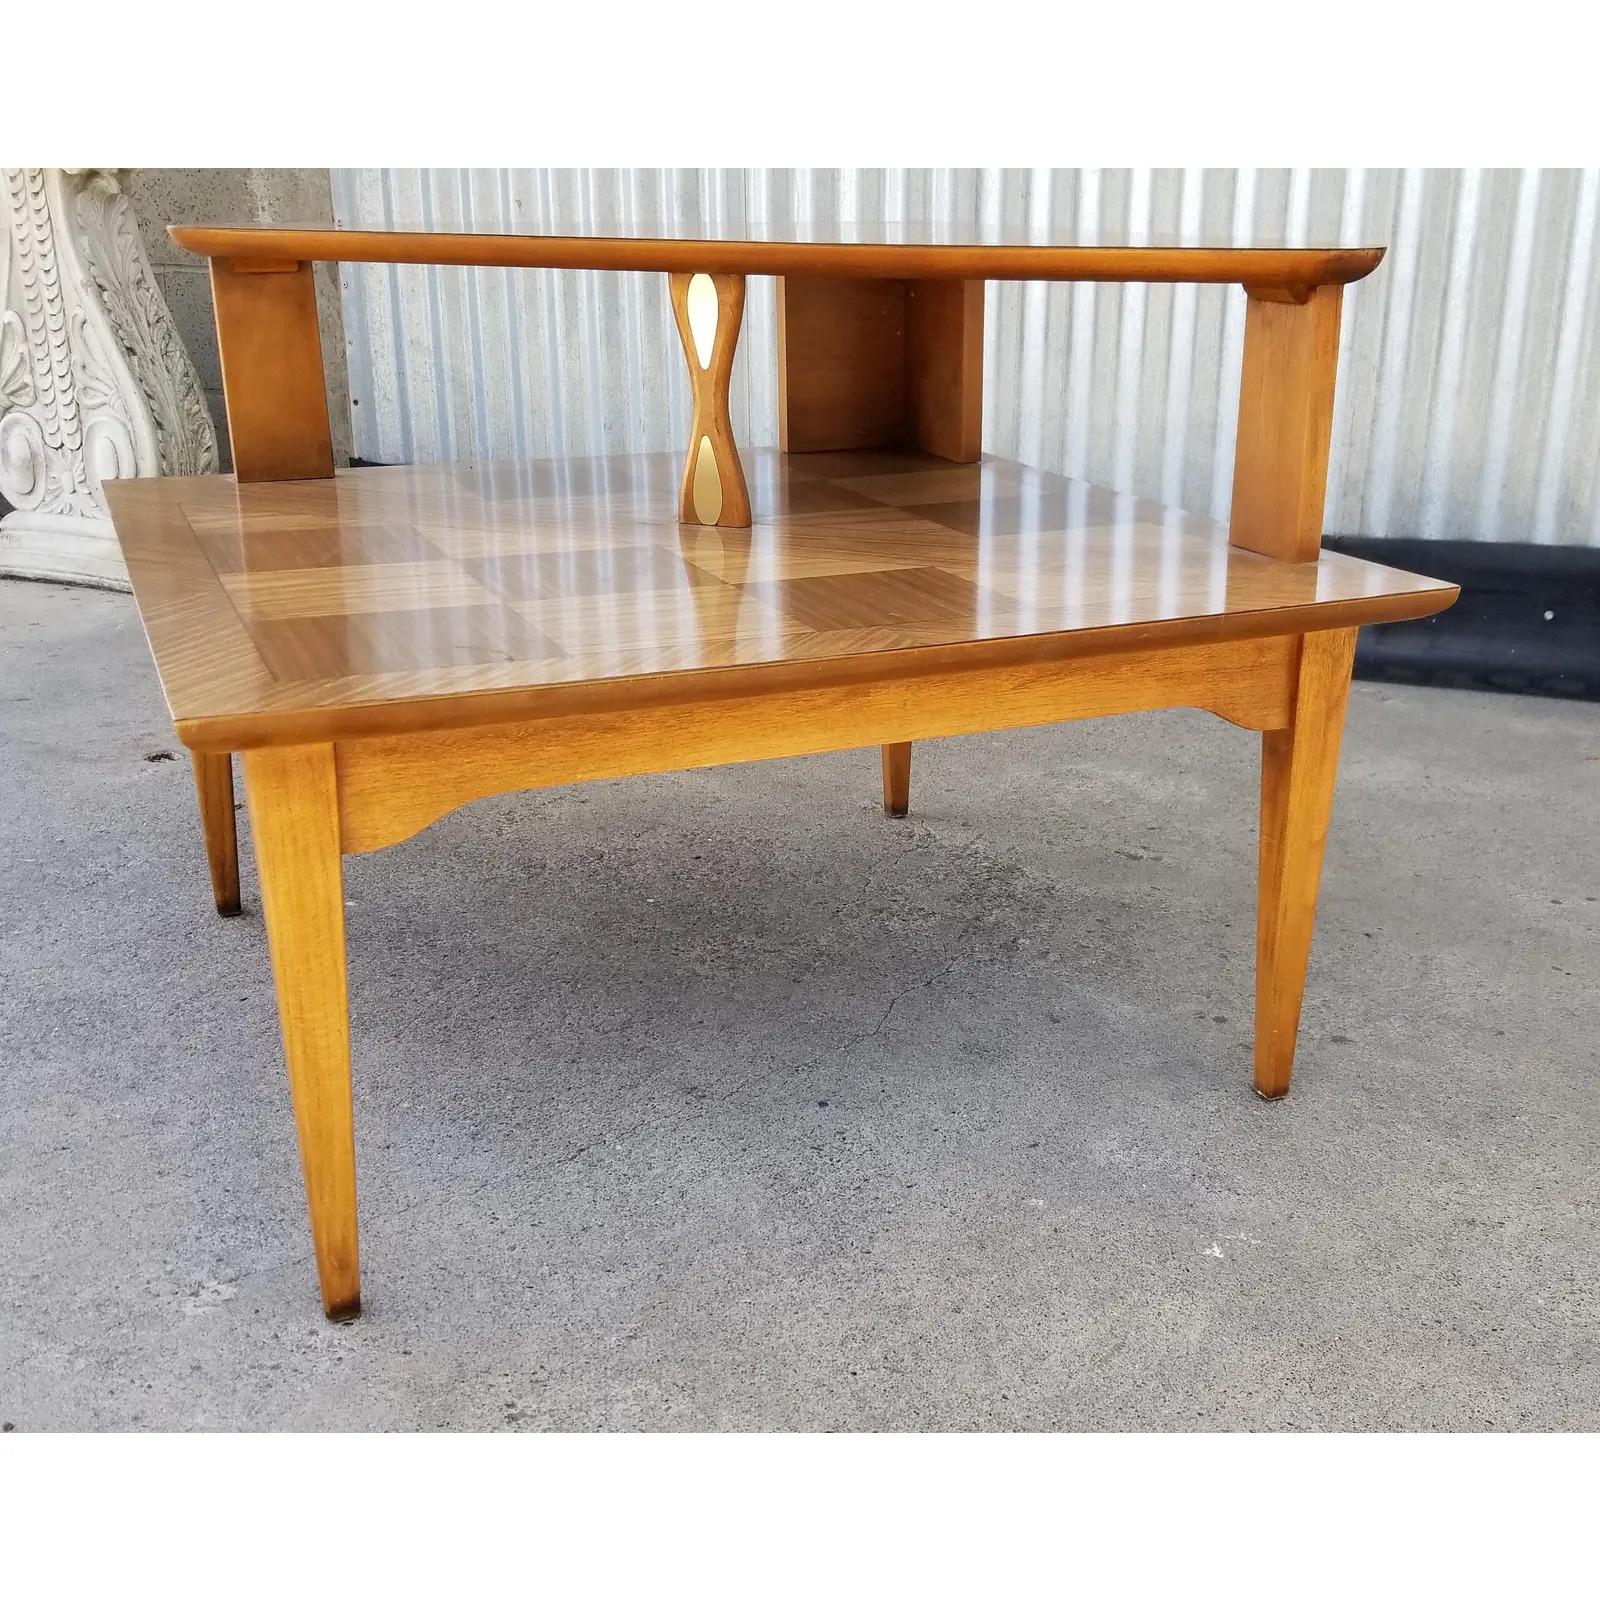 American Mid-Century Modern Corner Tables by Lane Furniture, a Pair